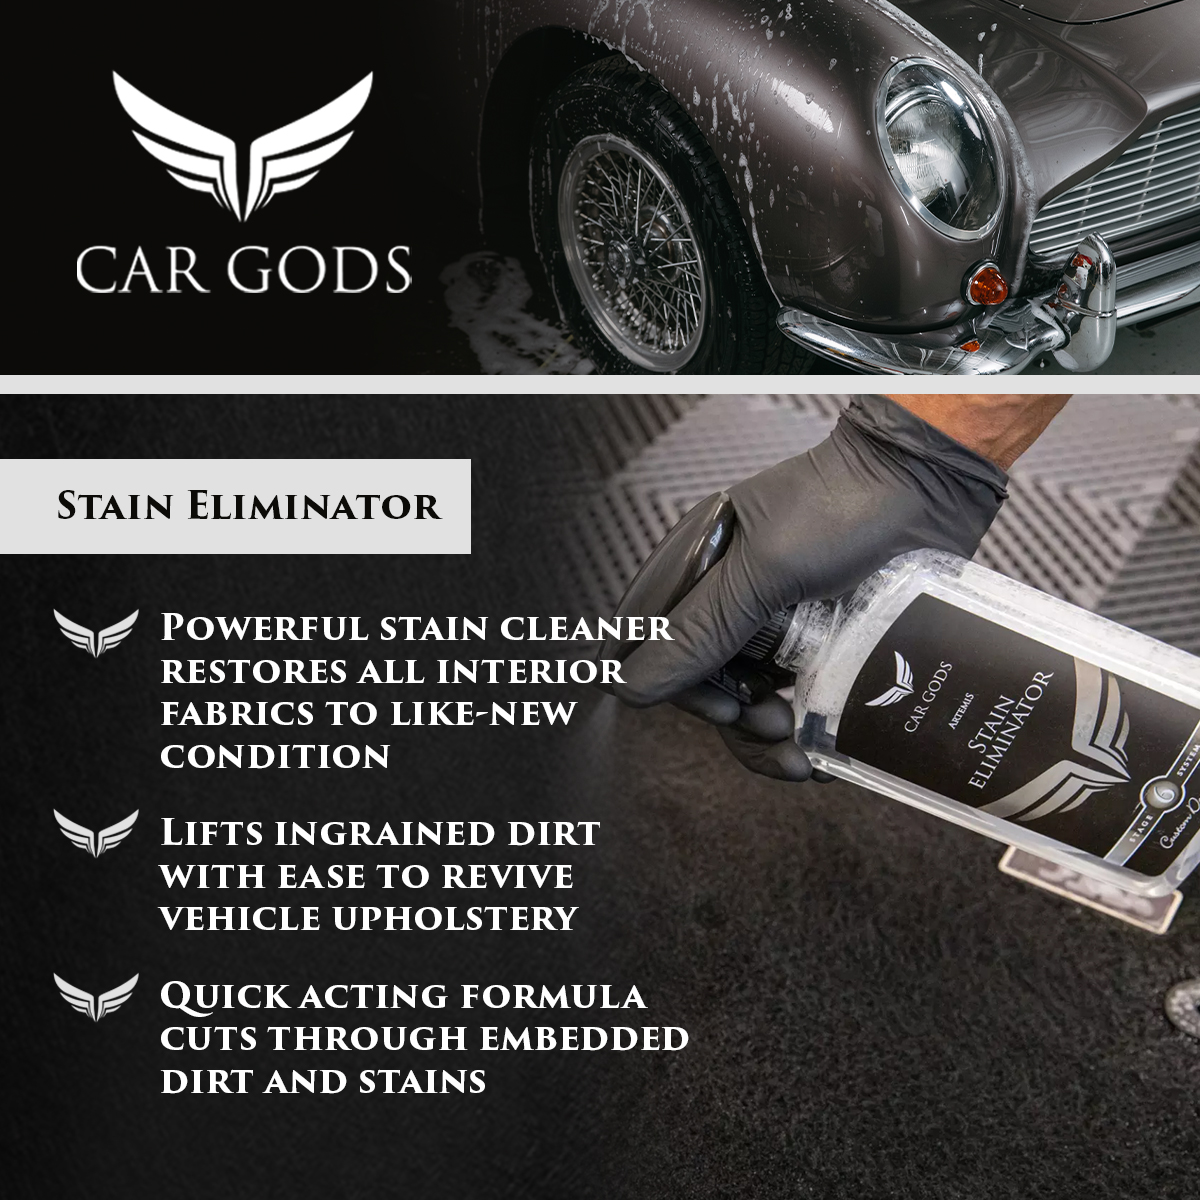 Car Gods Stain Eliminator. Powerful stain cleaner effortlessly cuts through embedded dirt to lift it, restoring interior upholstery and fabrics to a like-new condition. Plus, rids interior upholstery of stale and unpleasant odours, replacing them with a fresh linen fragrance.